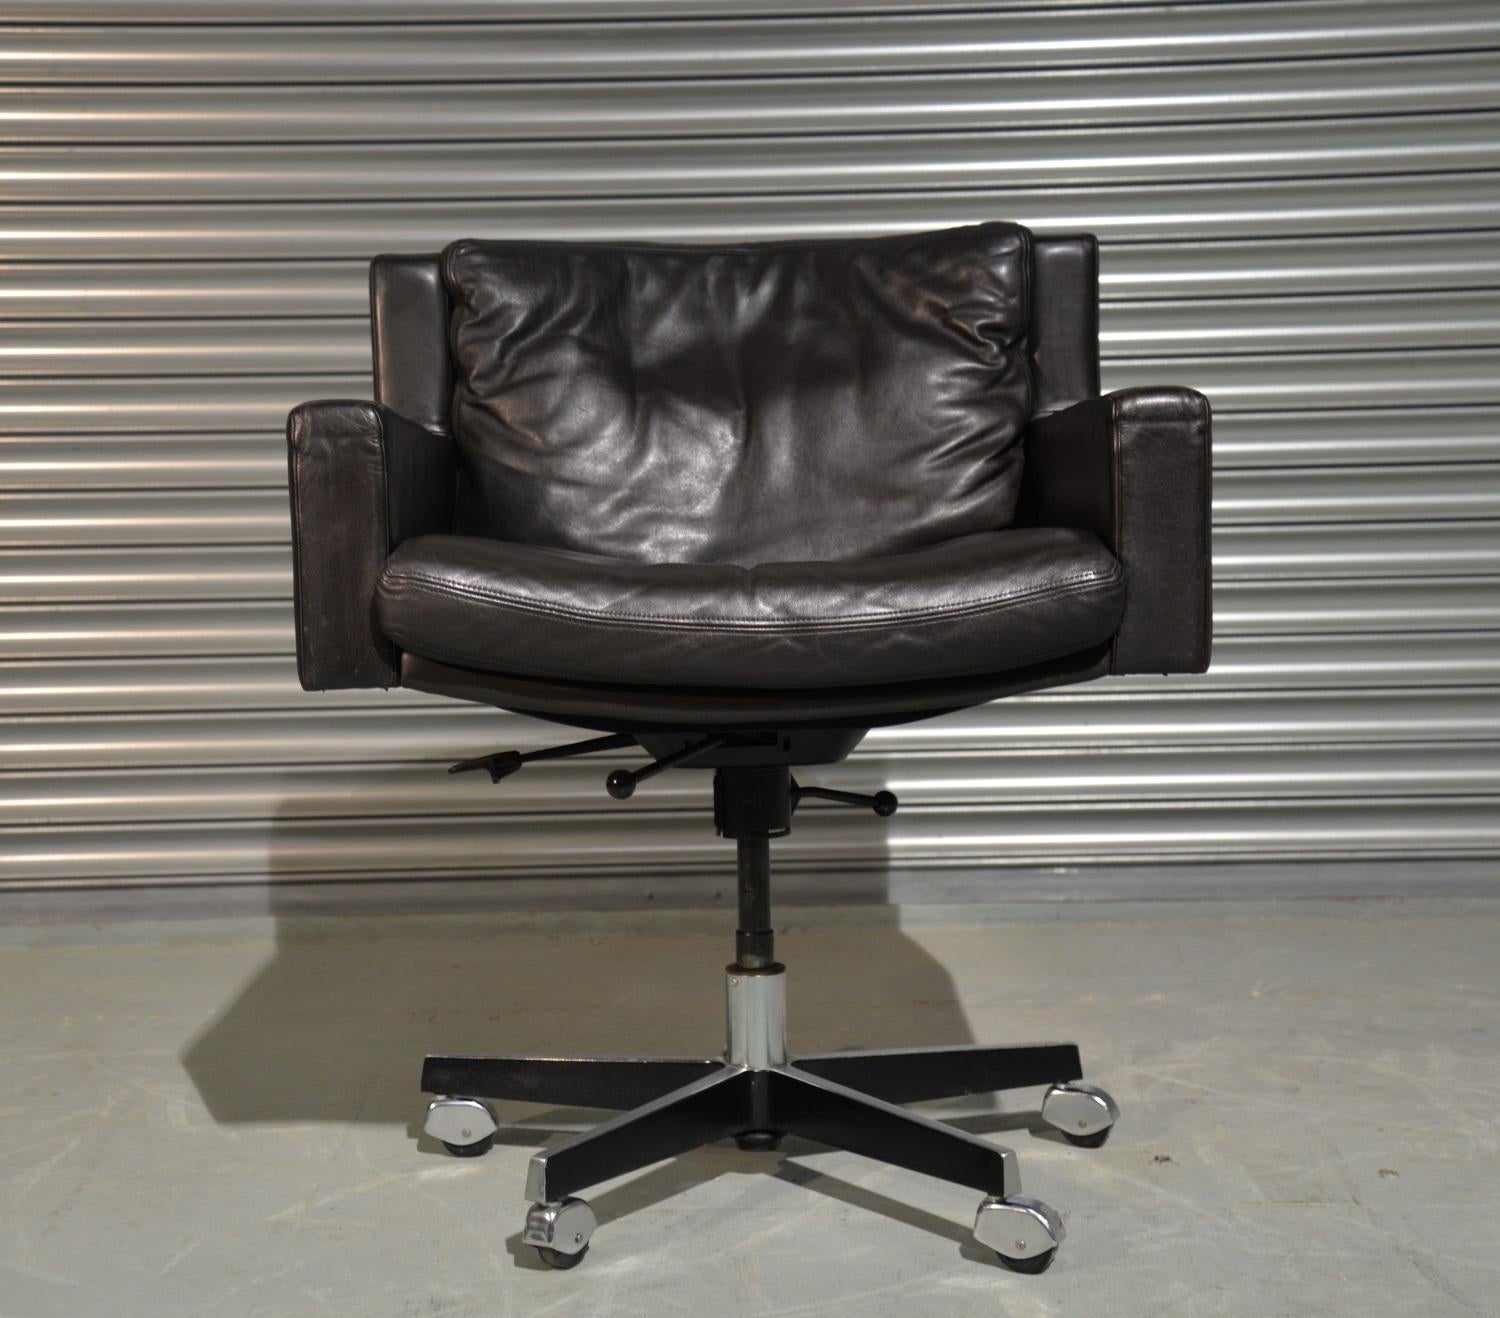 Discounted airfreight for our US and International customers ( from 2 weeks door to door) 

A highly desirable vintage Robert Haussmann swivel leather armchair on castors for de Sede.  Rarely available and built in the late 1950s by de Sede